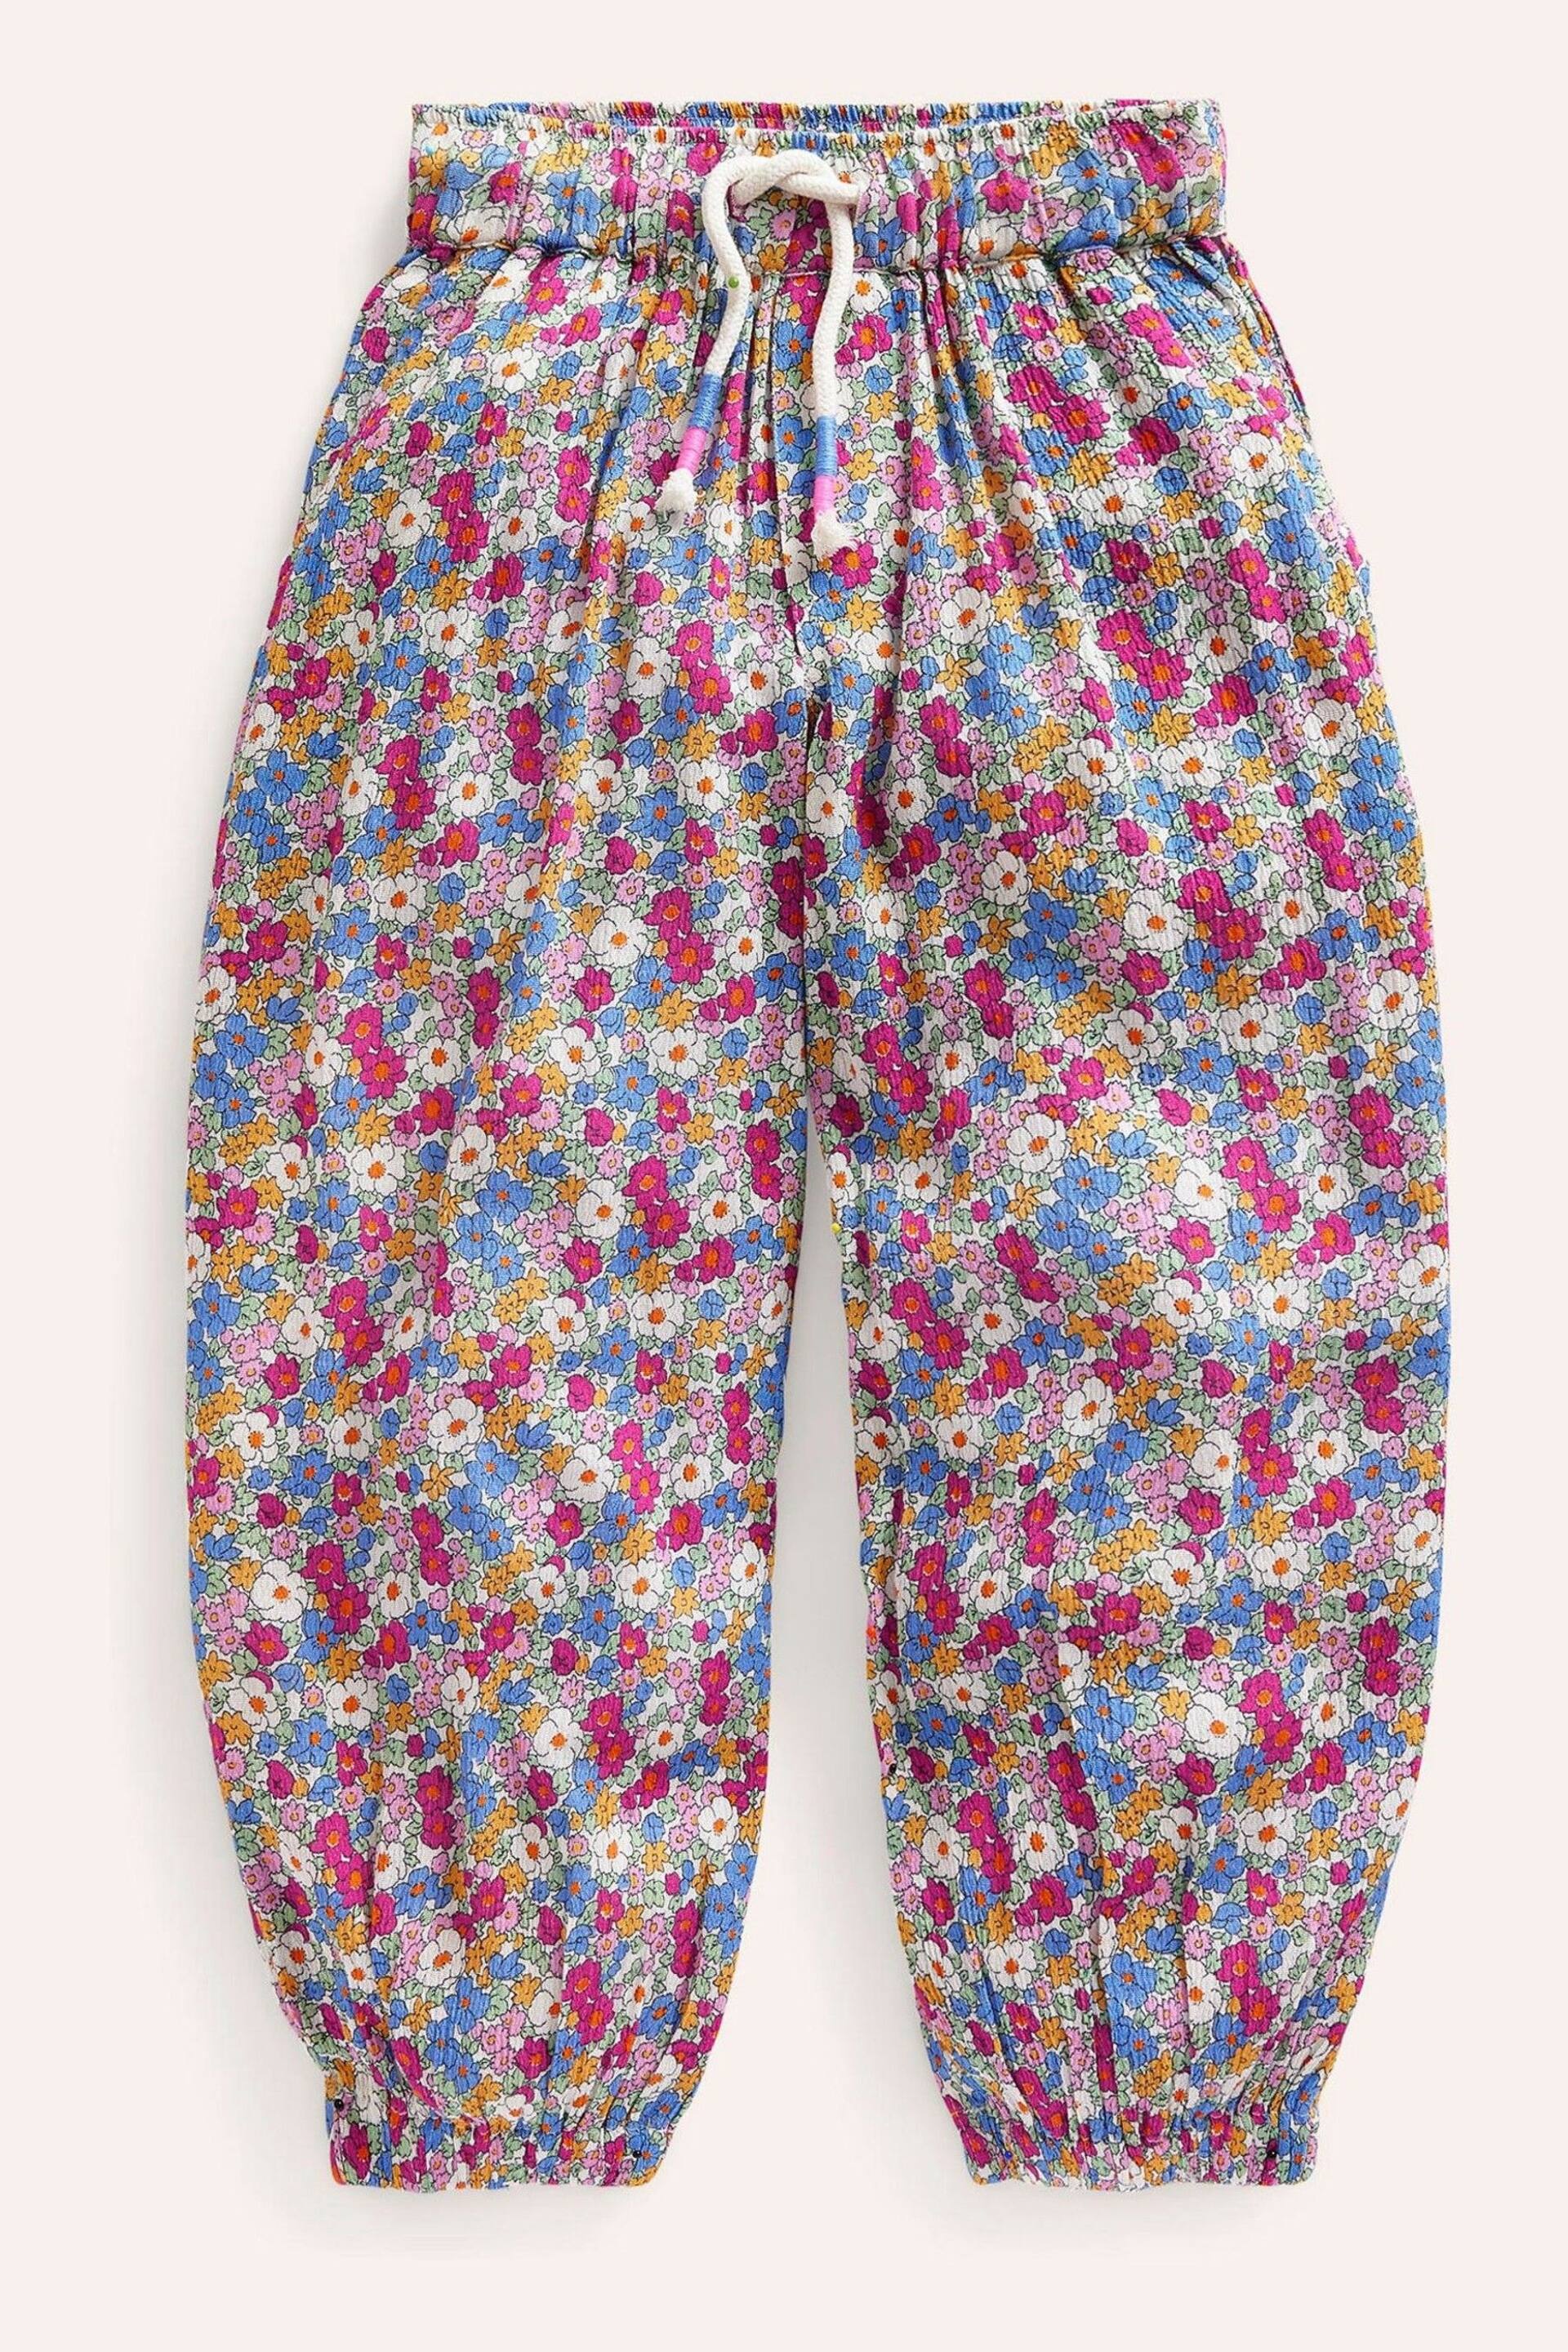 Boden Pink Tapered Holiday Trousers - Image 1 of 3